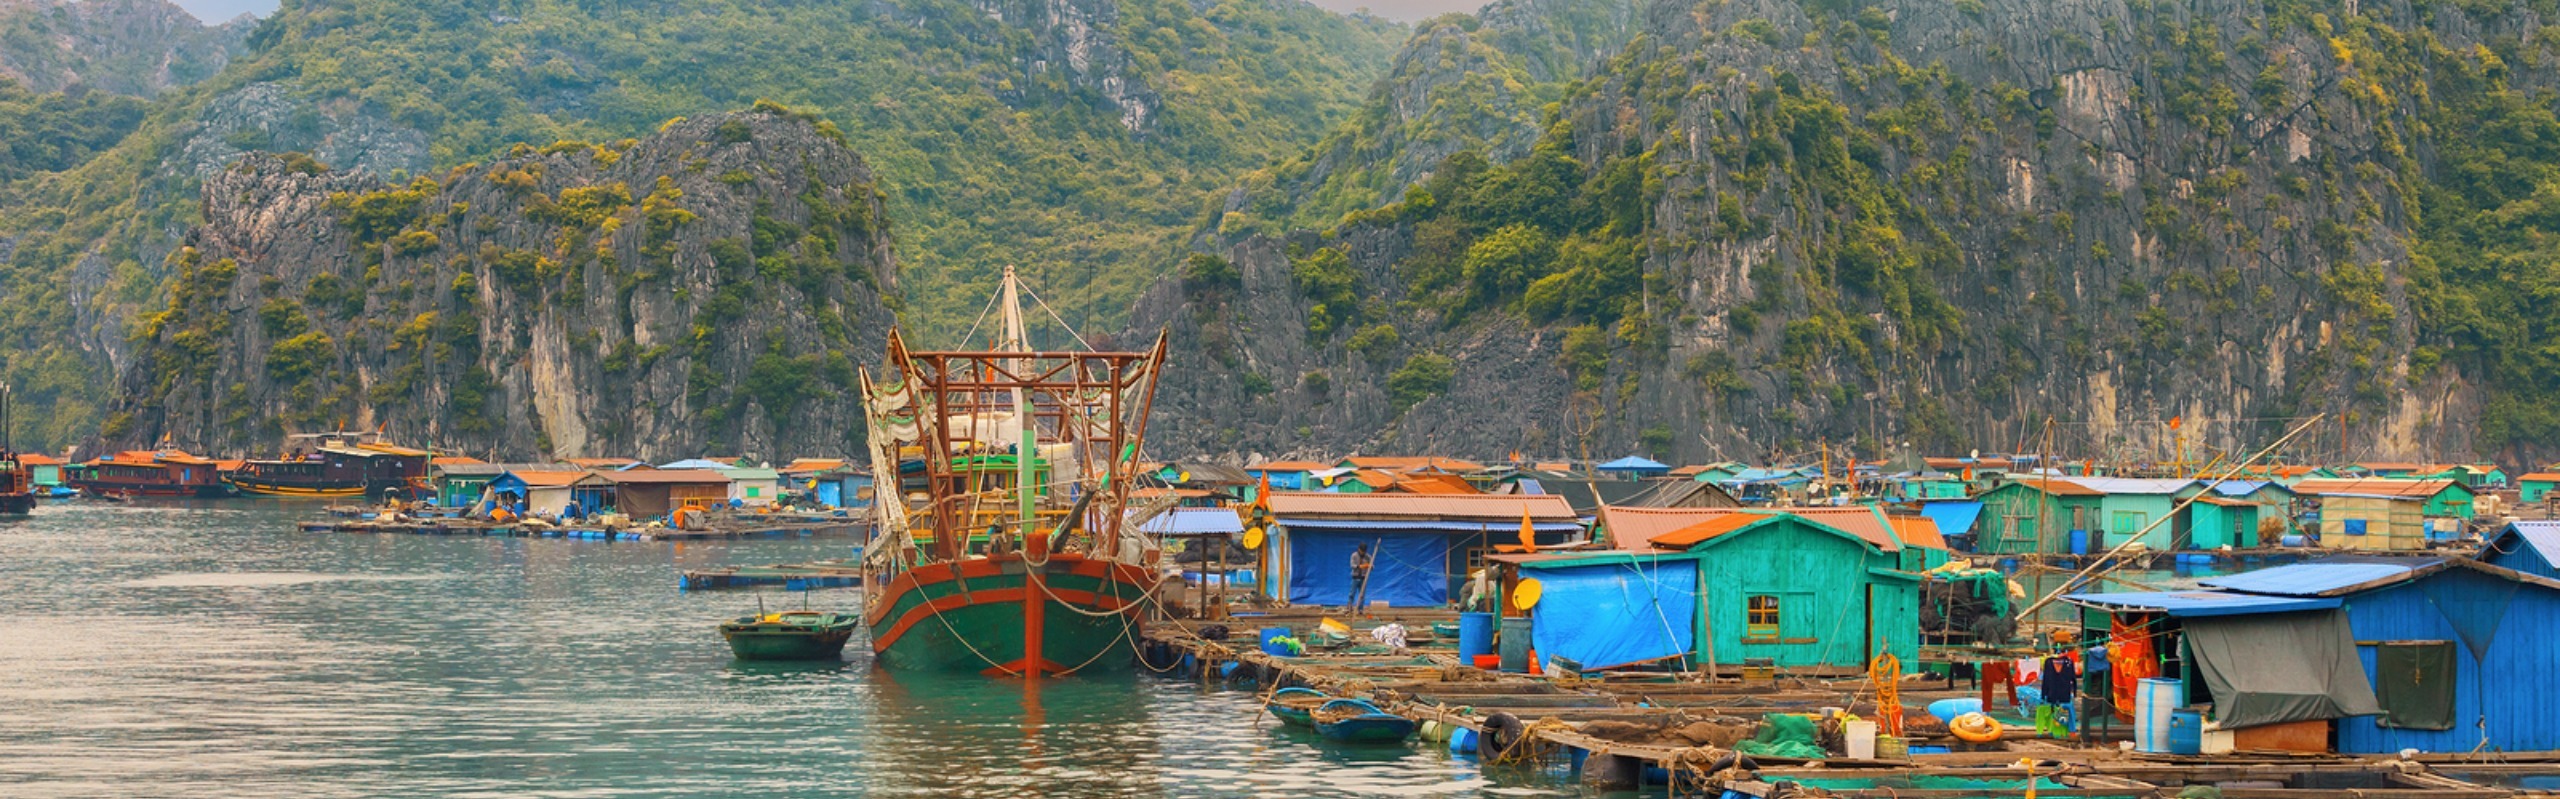 How to Spend 2 Weeks in Vietnam: Top 4 Itineraries 